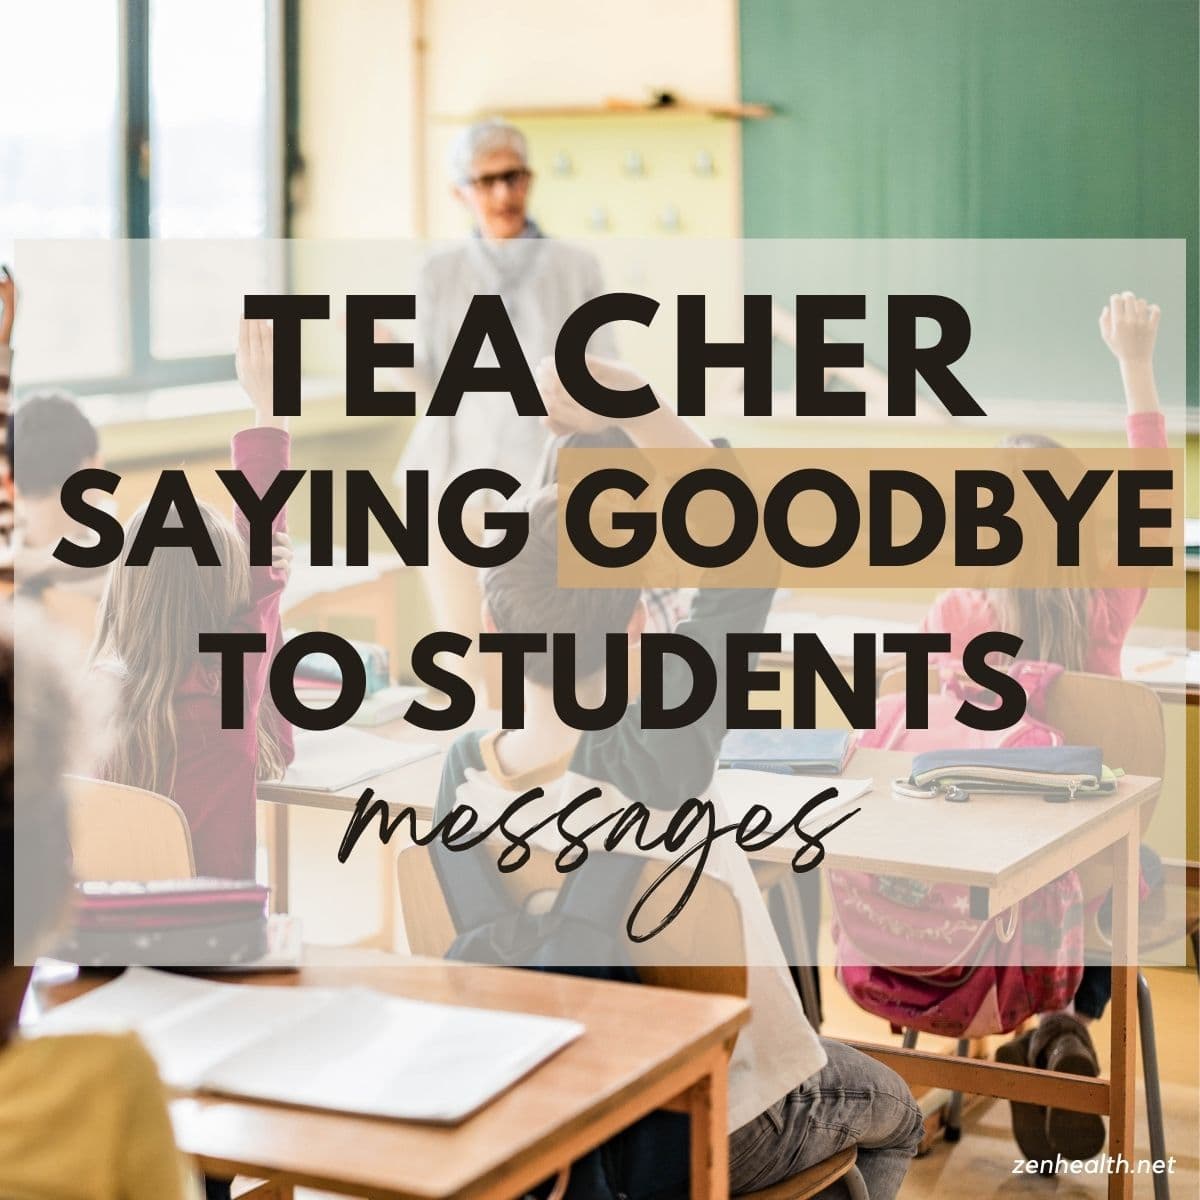 30 Teacher Saying Goodbye to Students Messages